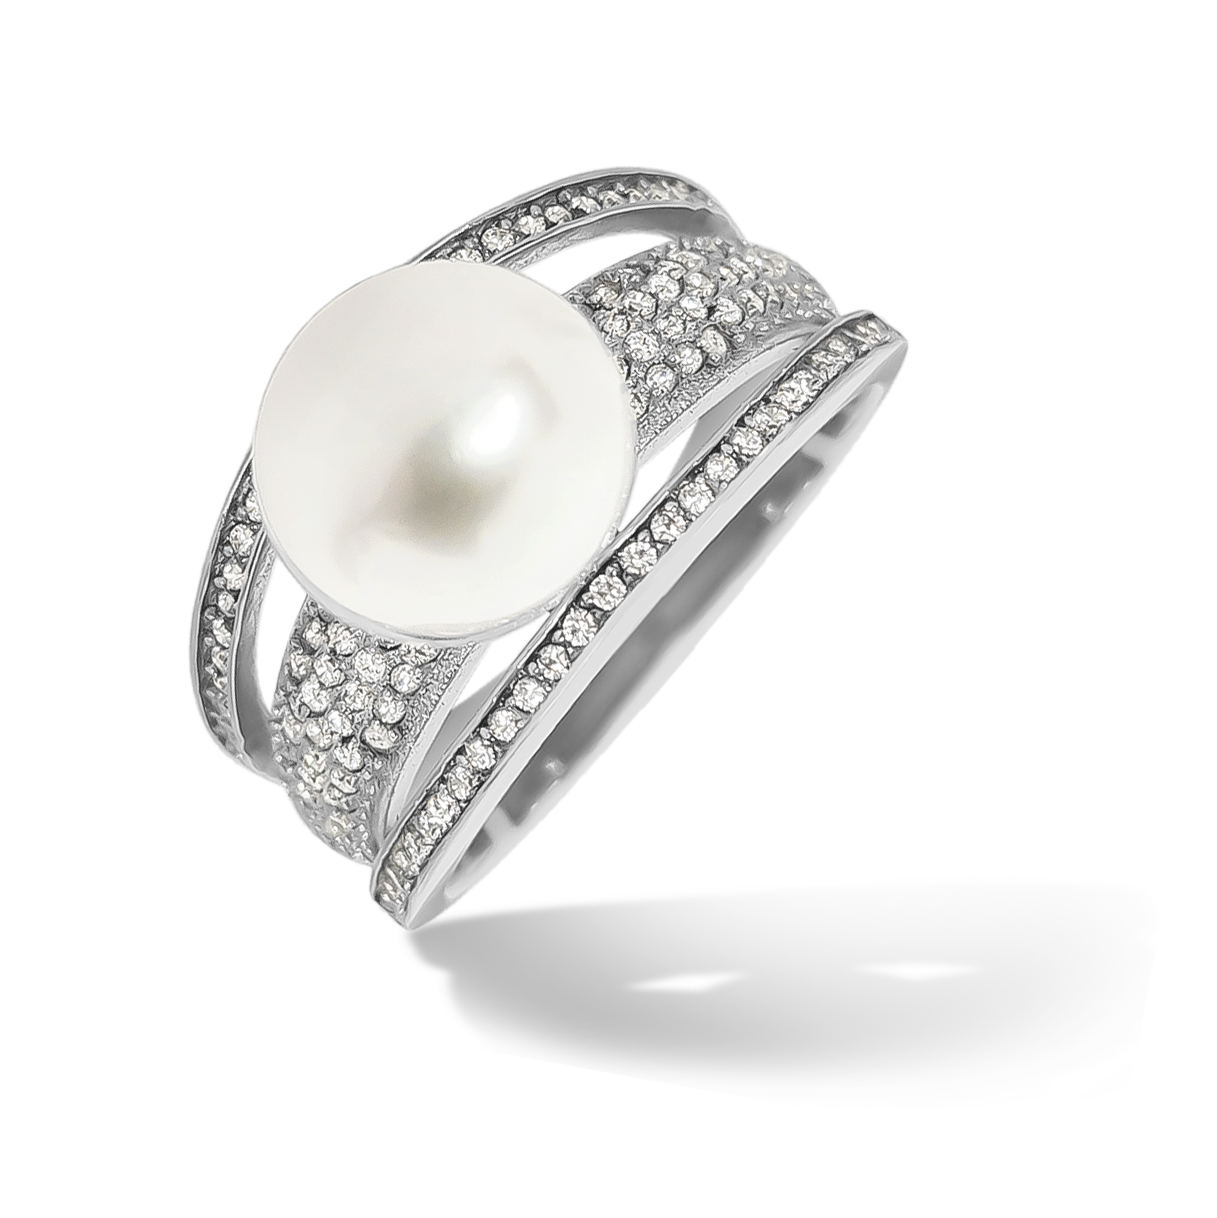 Pearl set in a split shank band Ring in 925 Sterling Silver